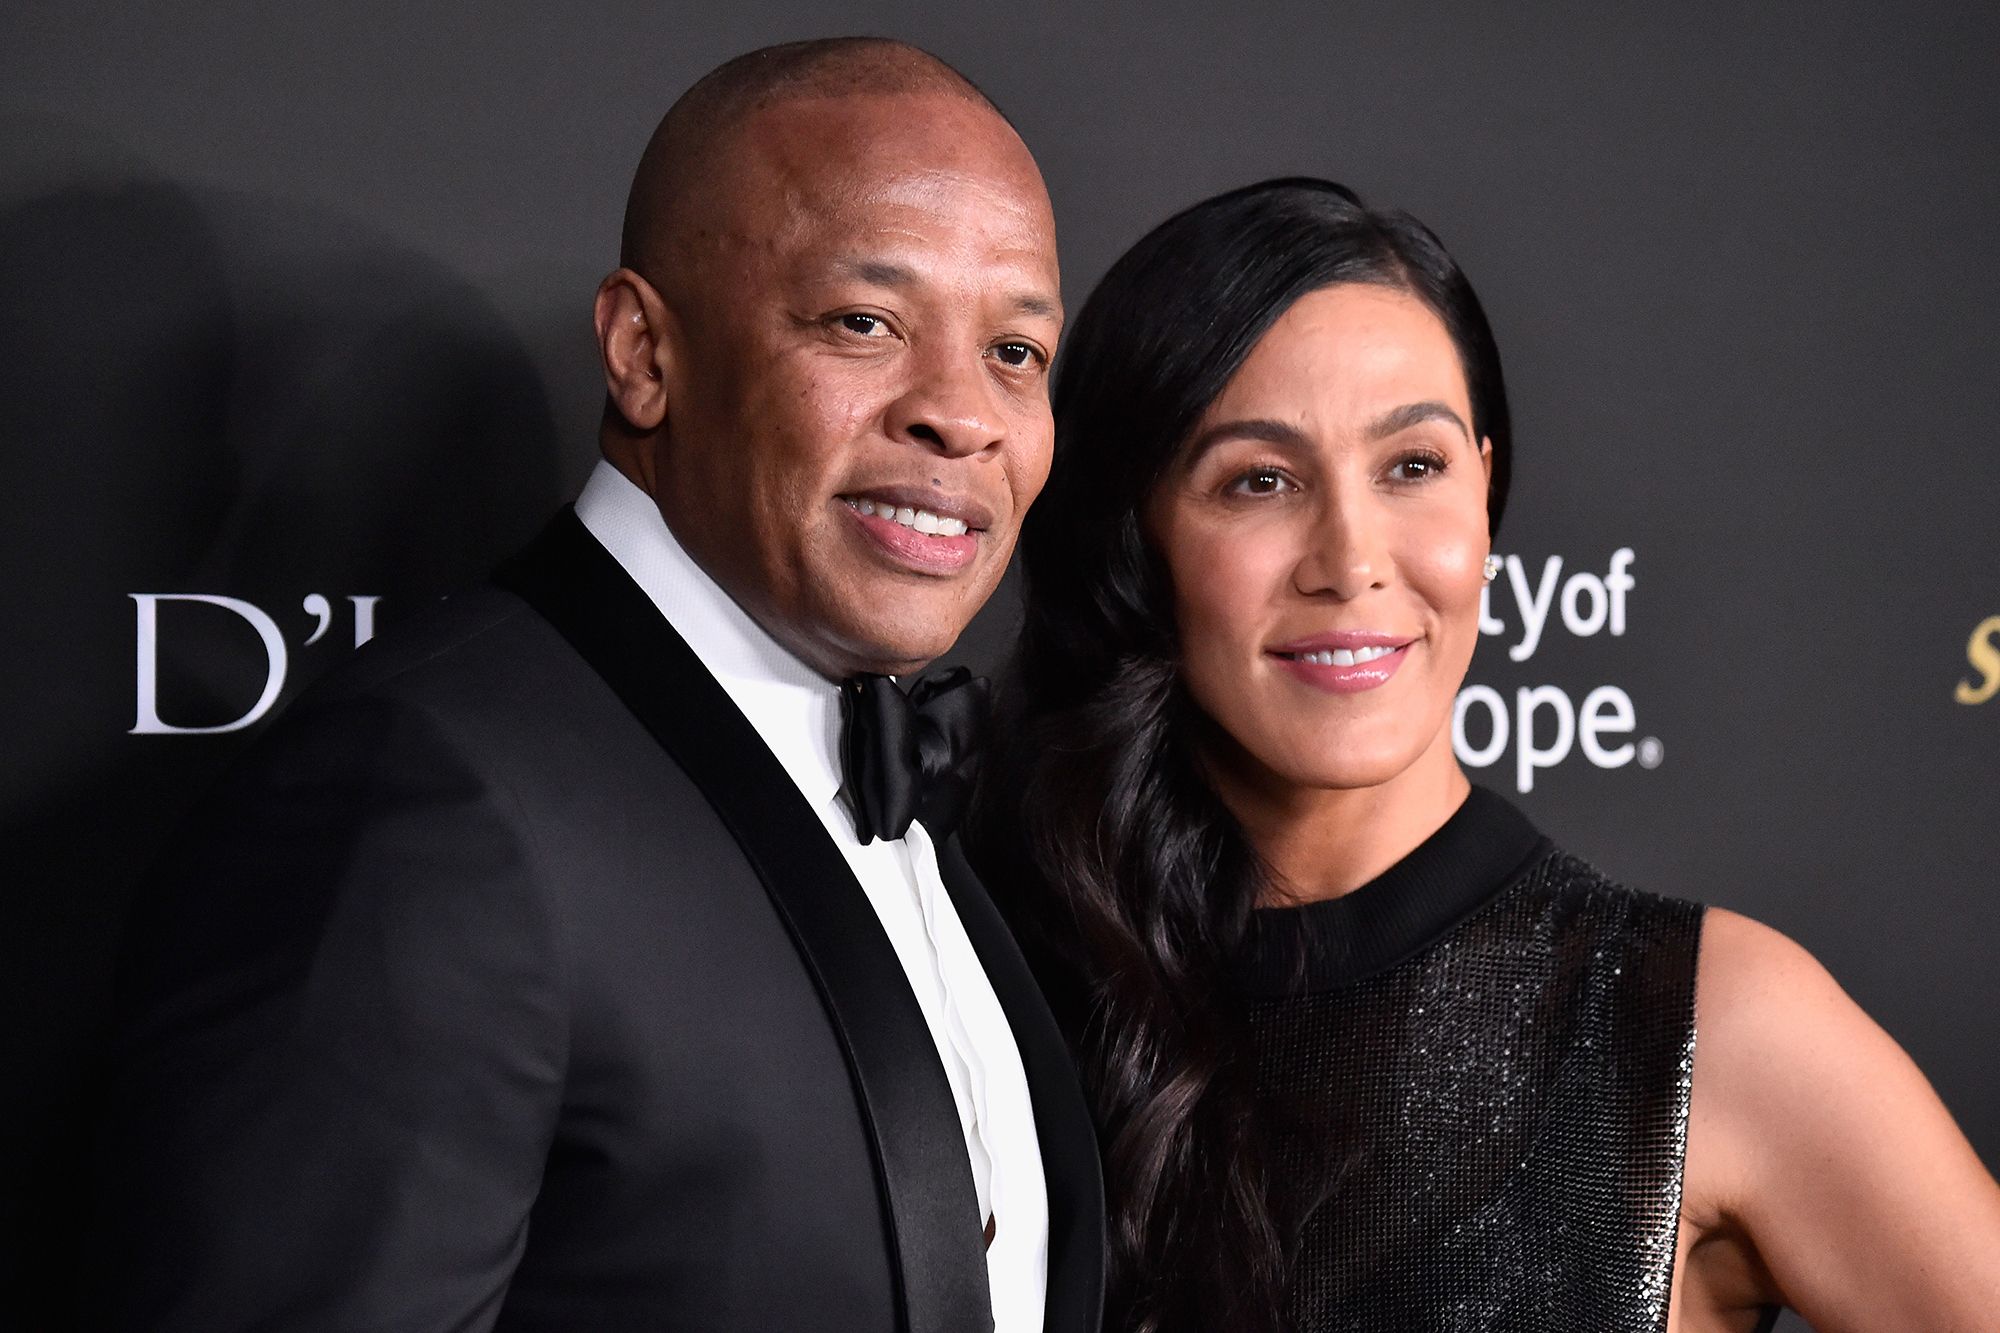 Dr Dre accuses ex-wife of stealing over $350k from him